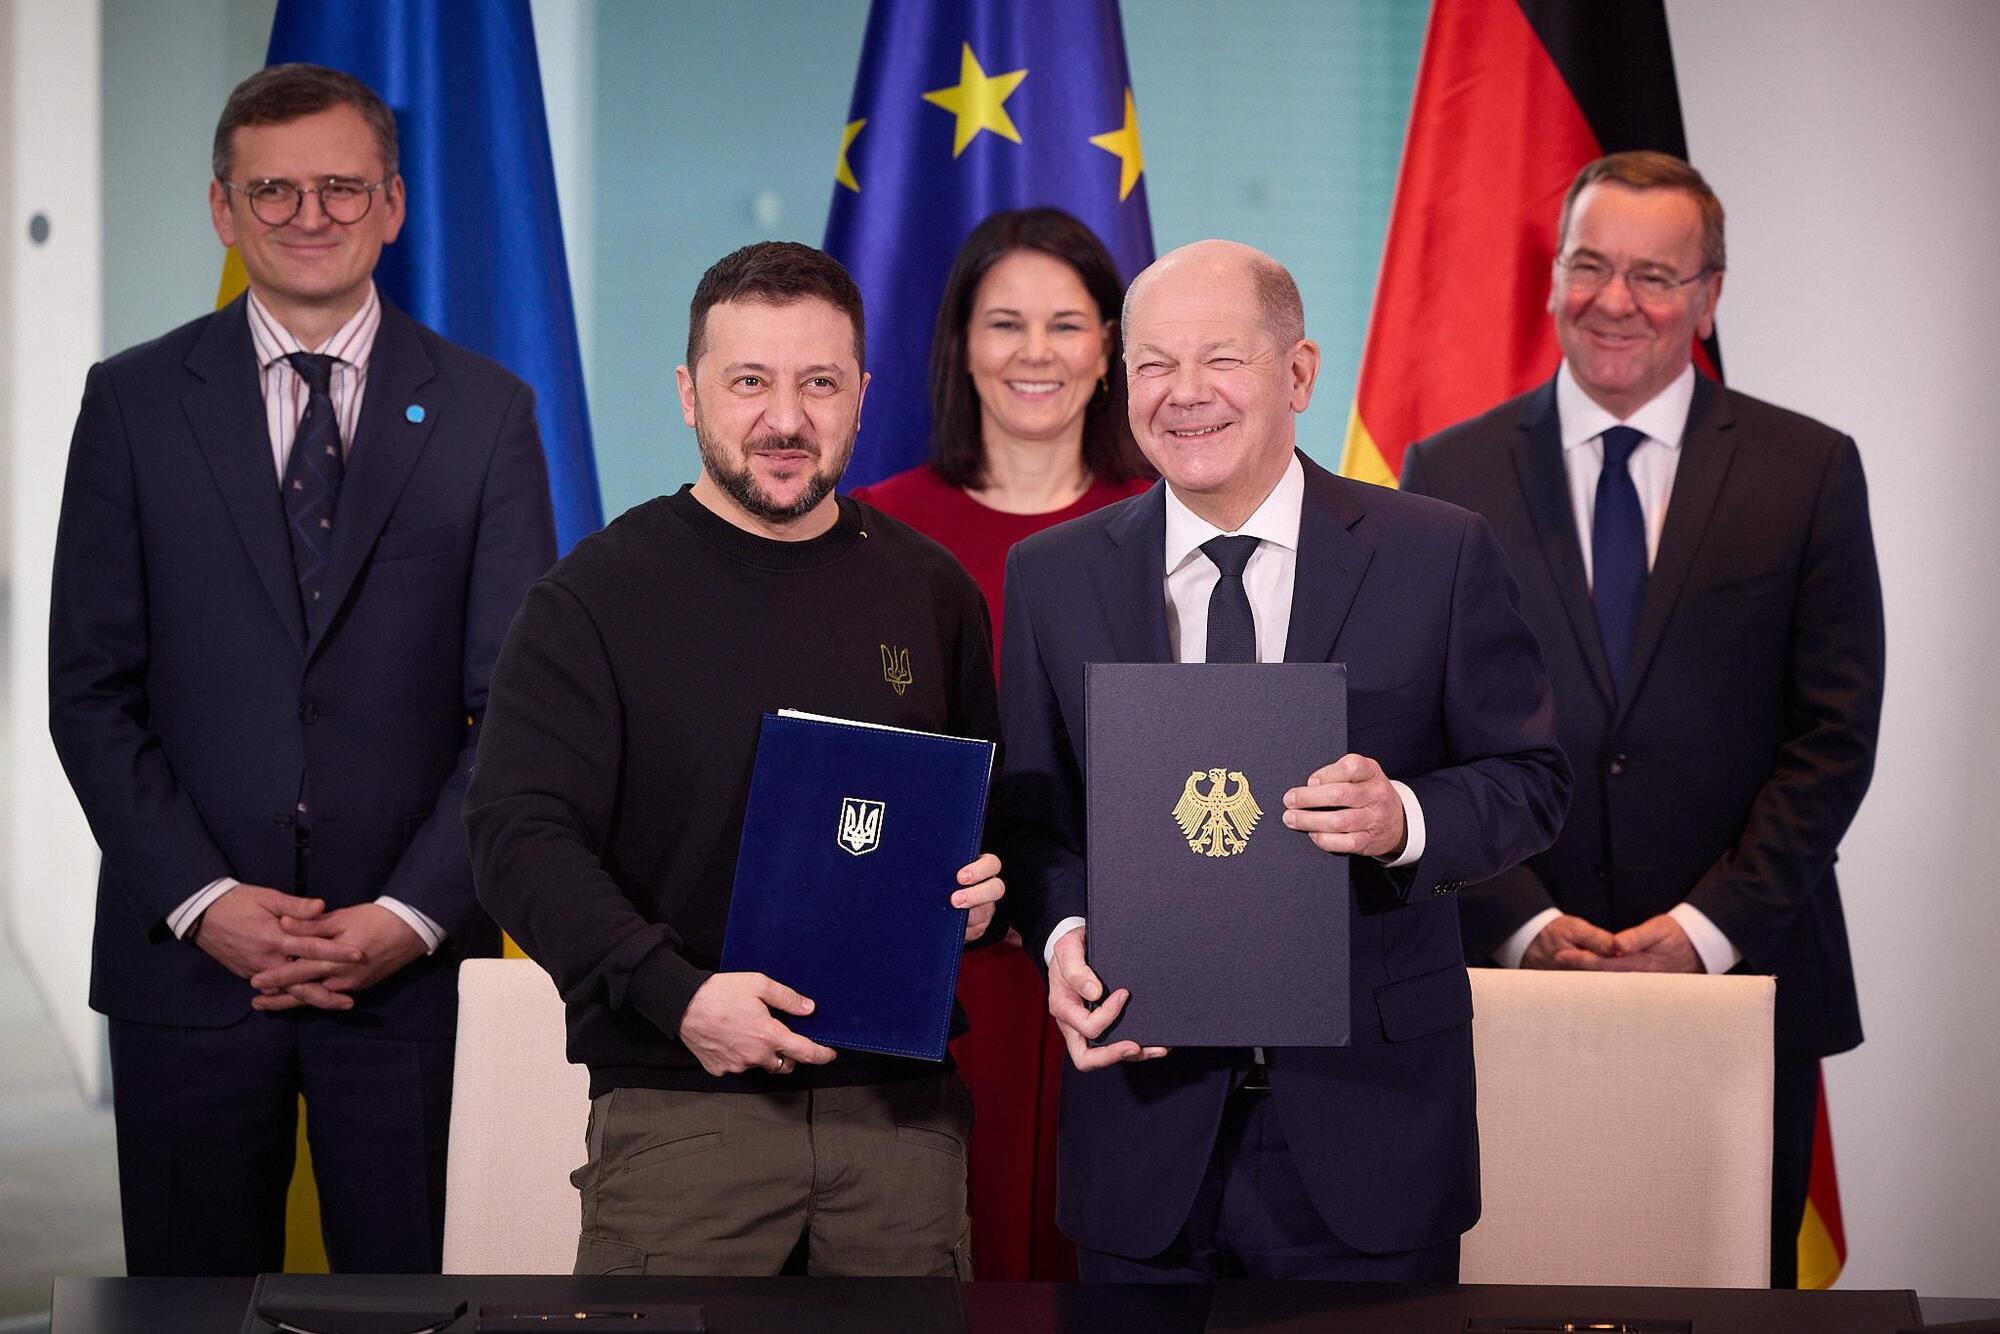 President Zelenskyy and Federal Chancellor Scholz